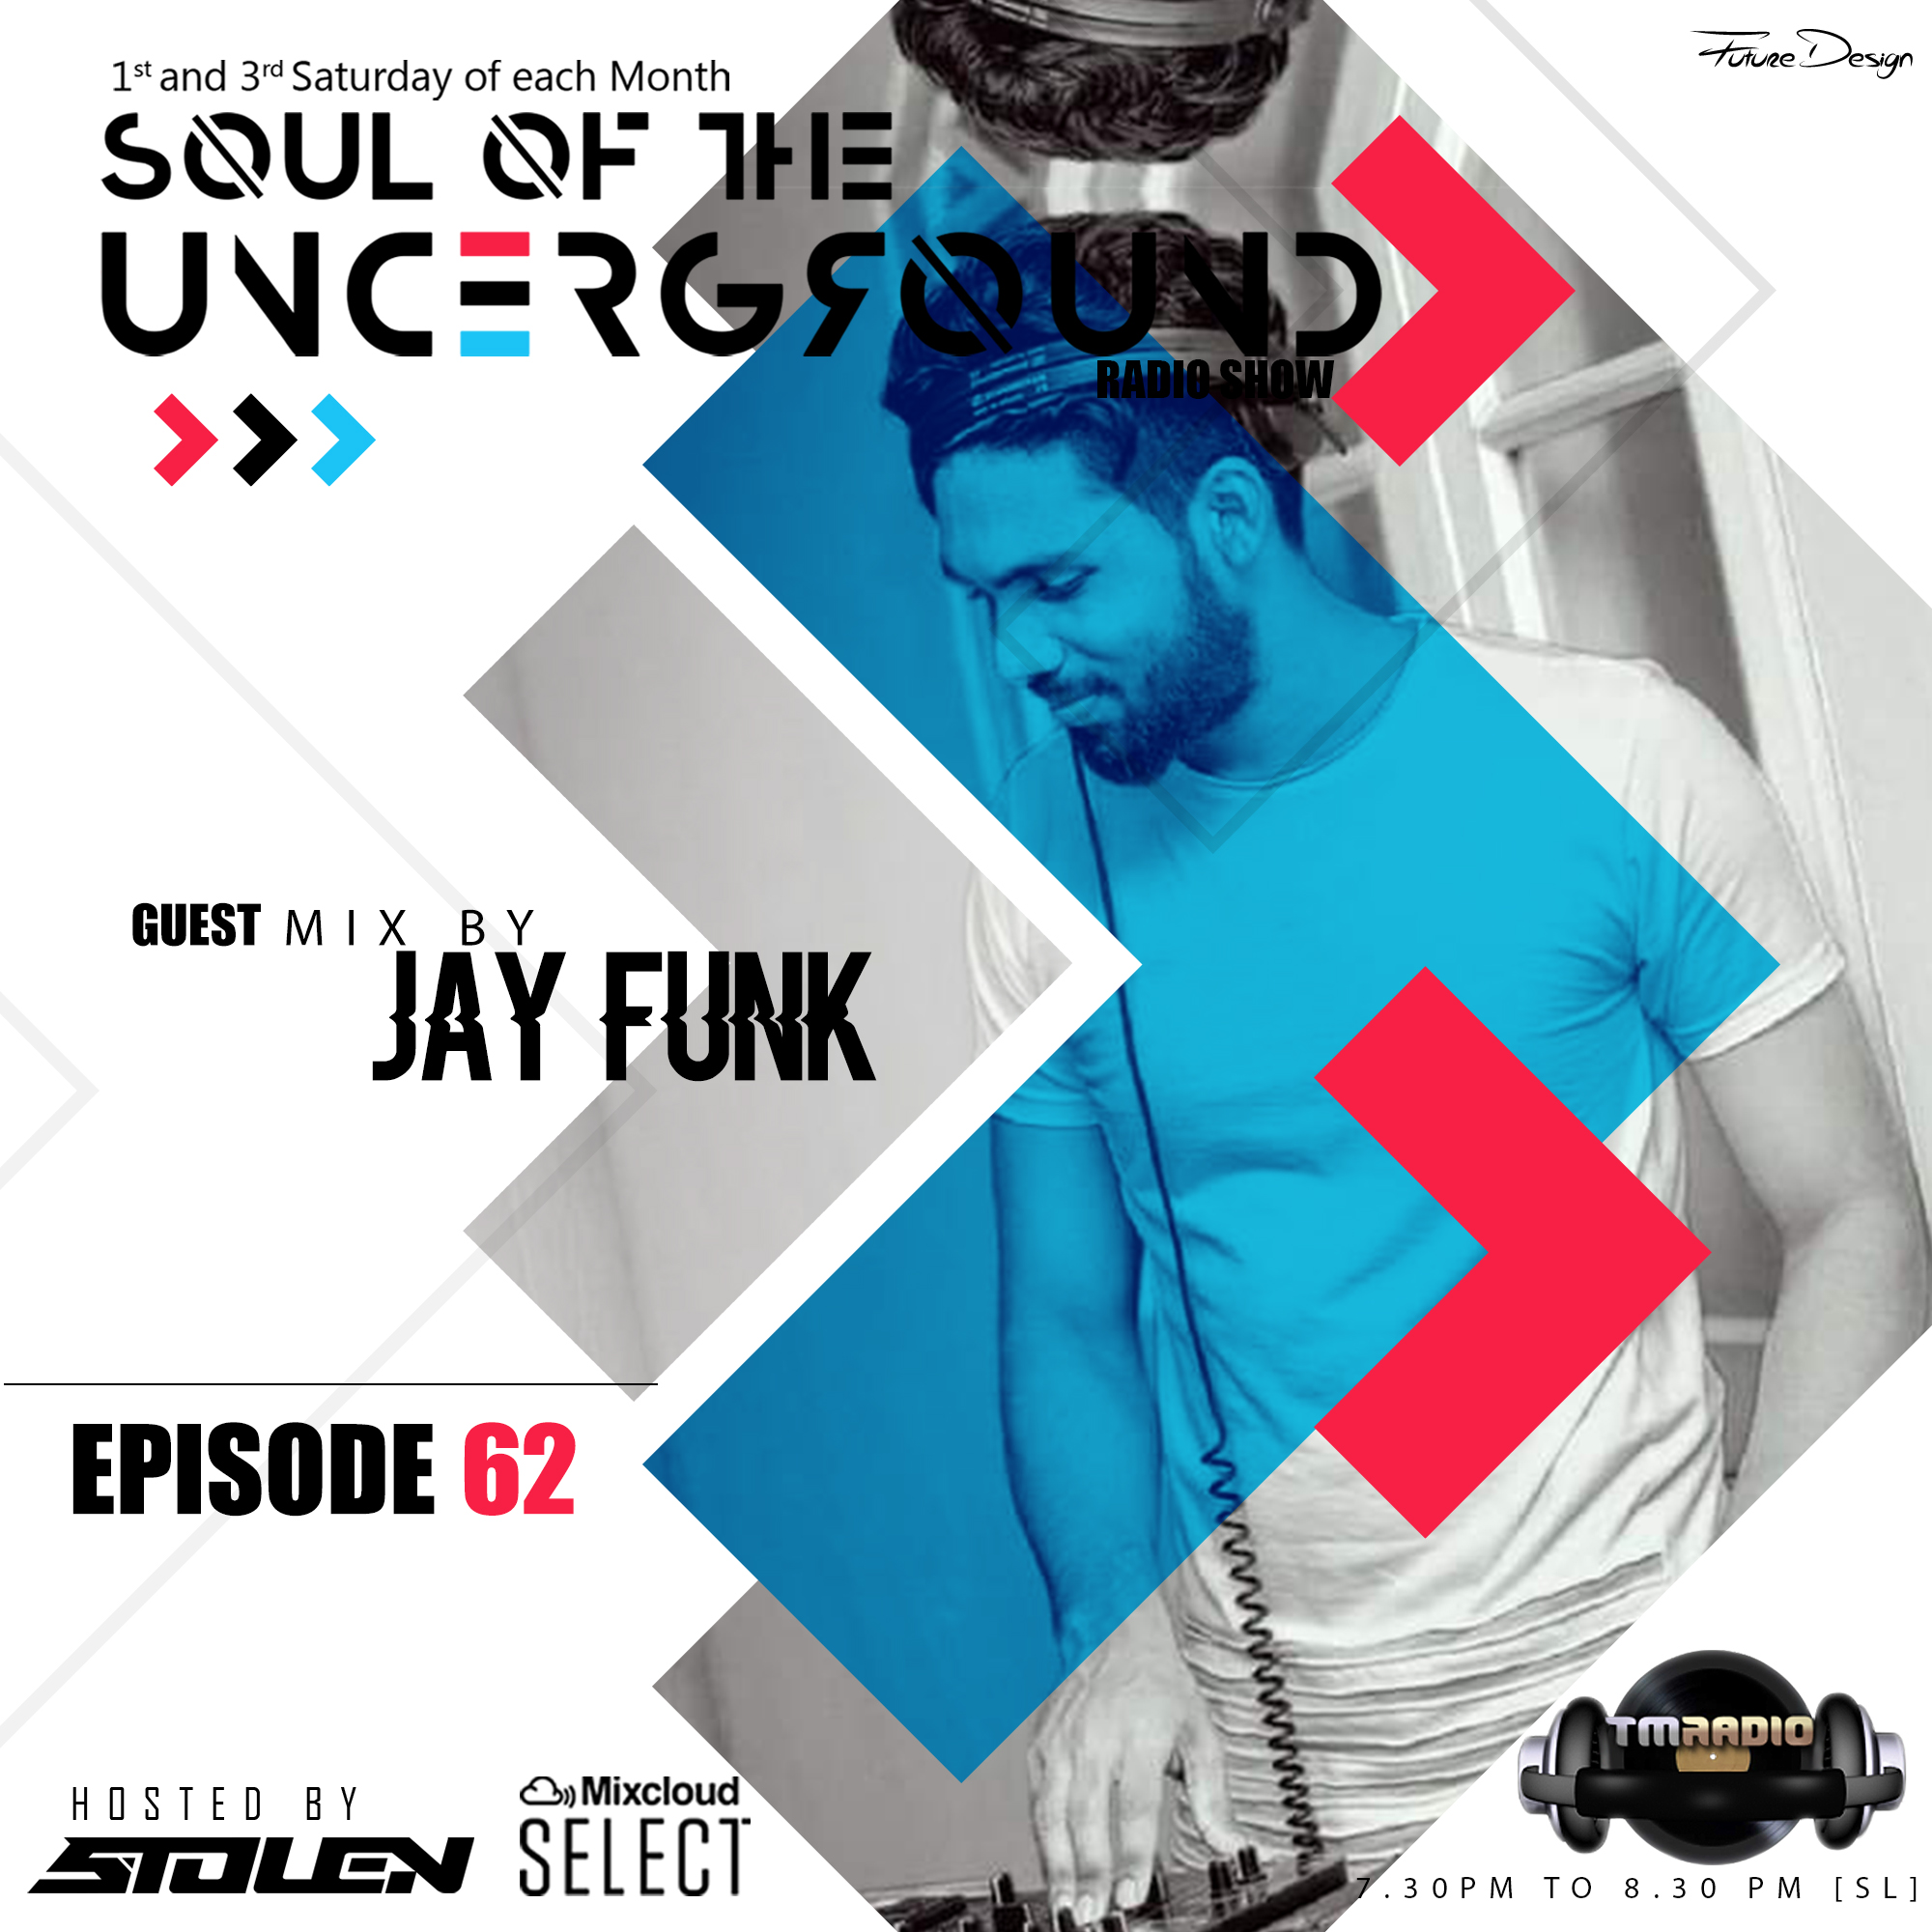 Soul of the Underground :: Episode 062 Guest mix by Jay Funk (Sri Lanka) (premieres on December 3rd) banner logo